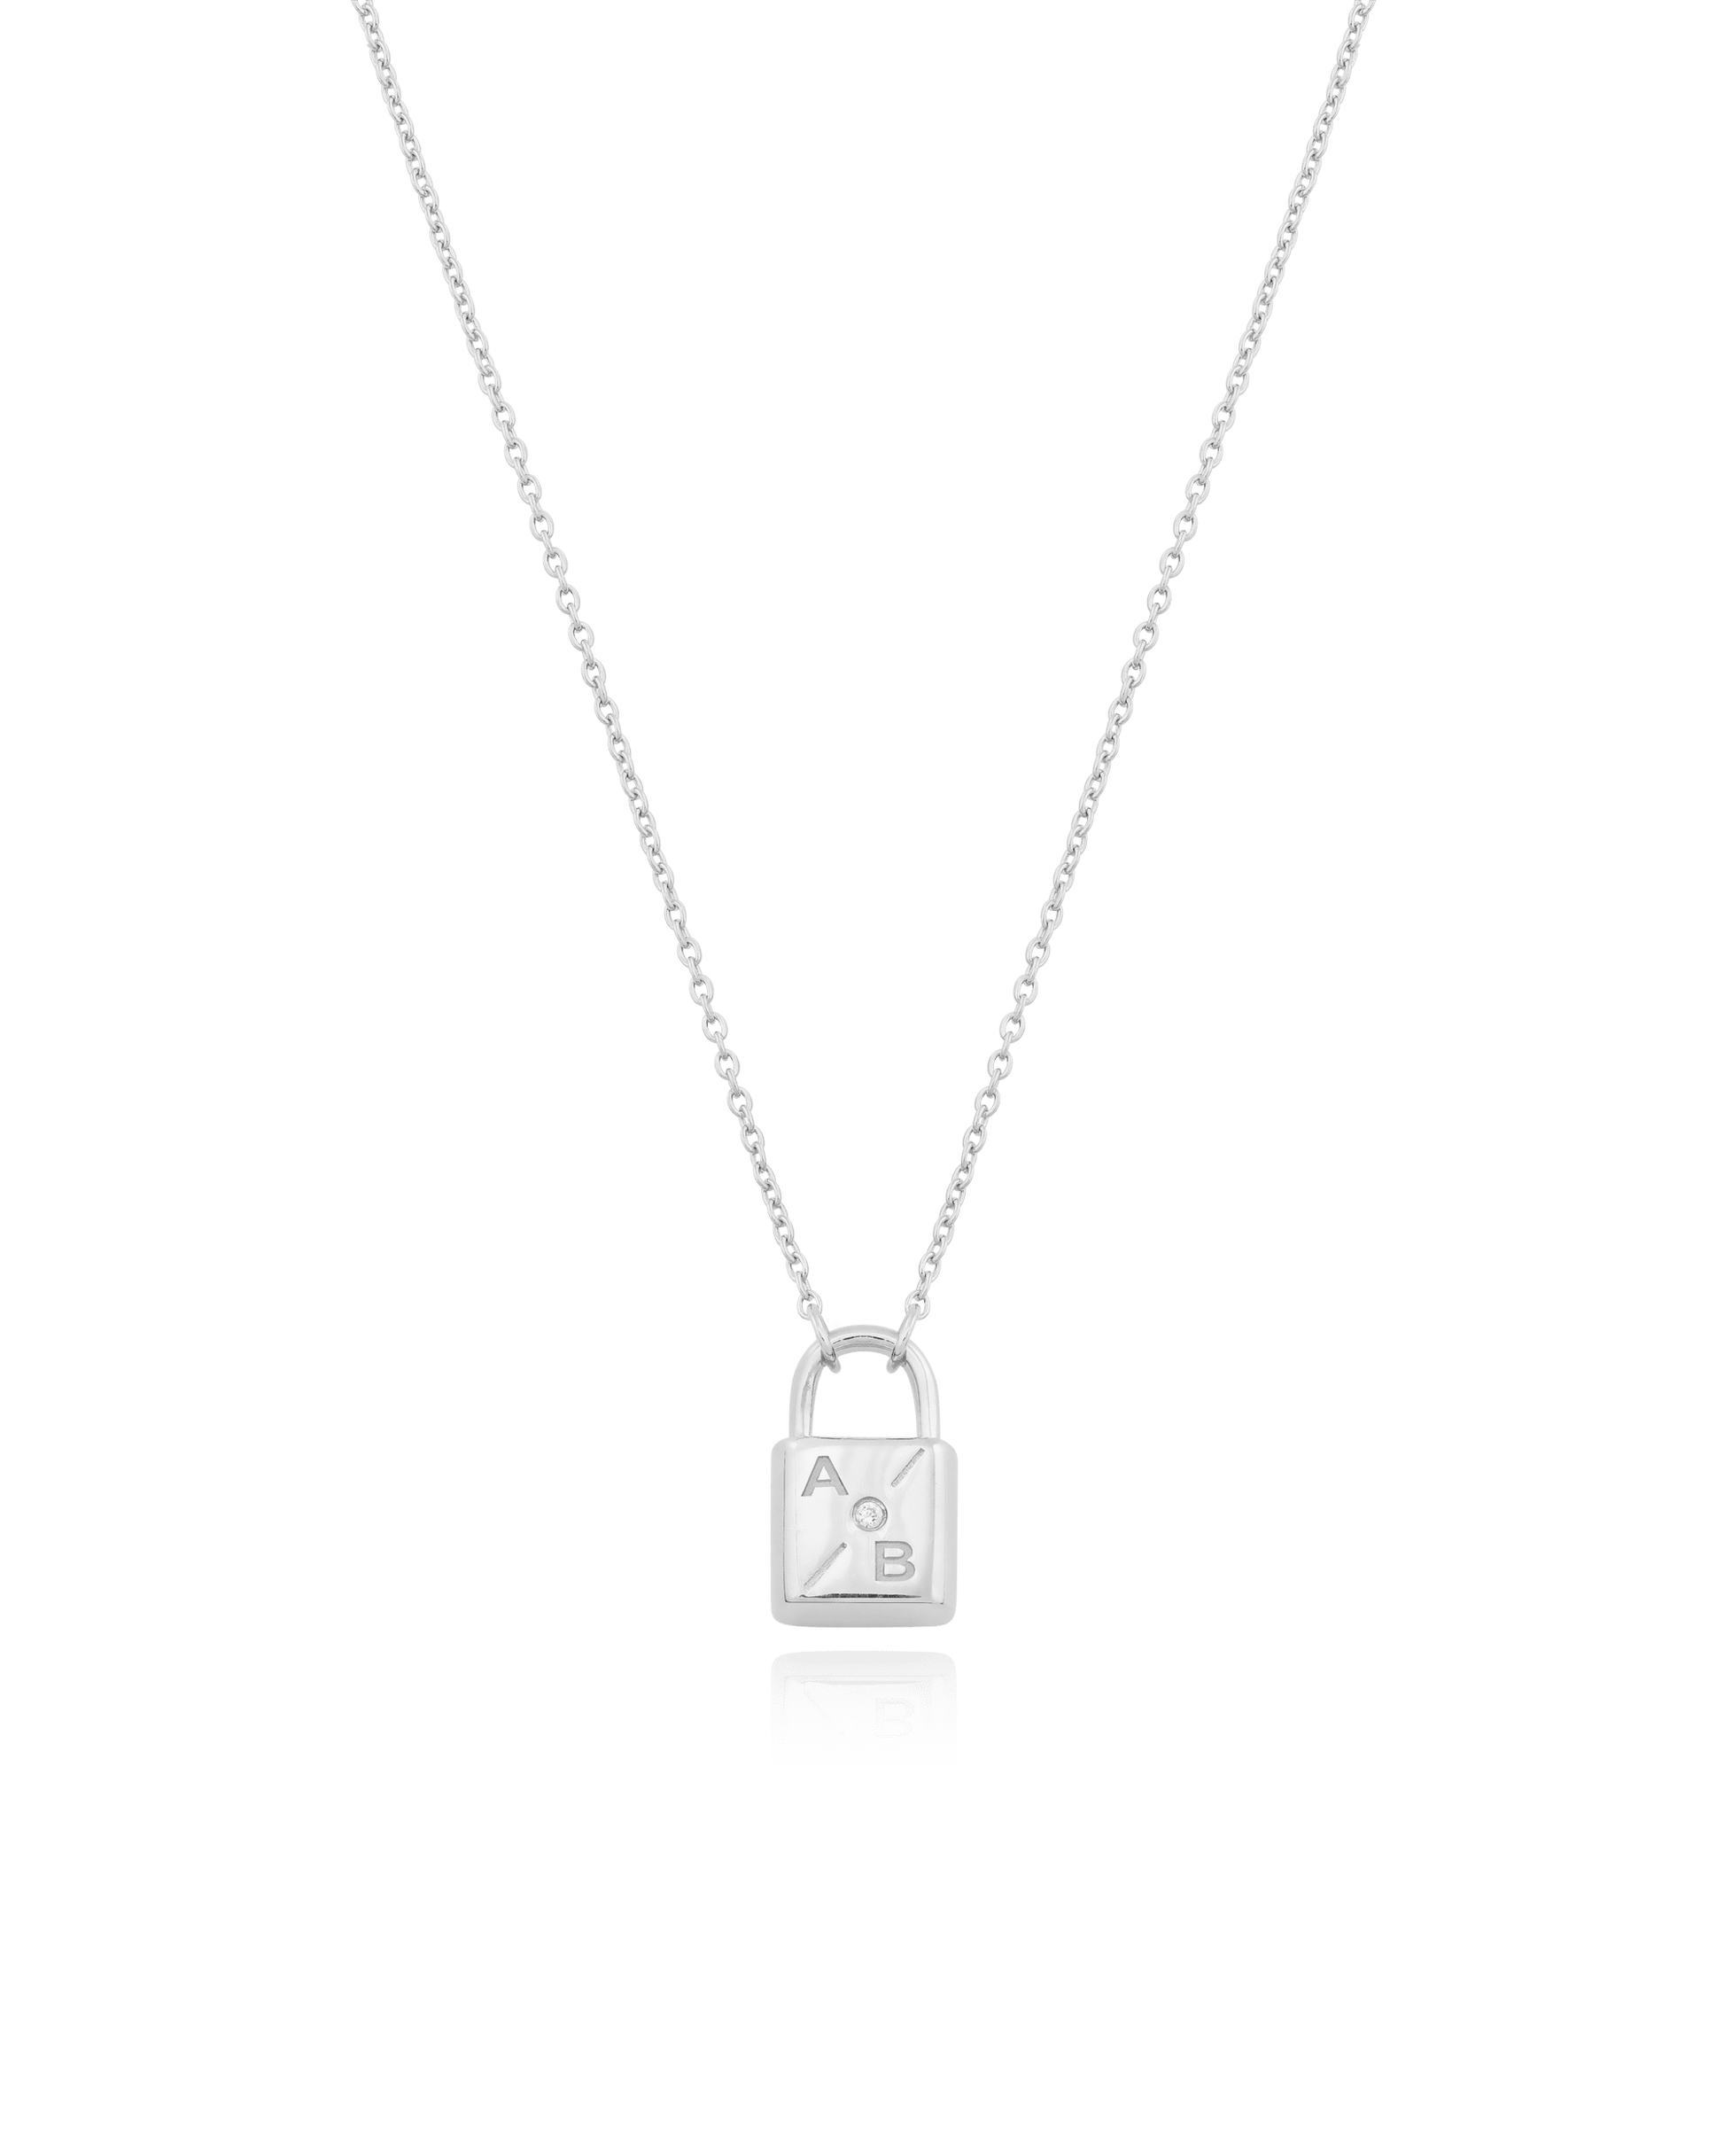 Pont Lock Necklace w/ Diamond - 925 Sterling Silver Necklaces magal-dev 2 Initials (diagonal) 14" 